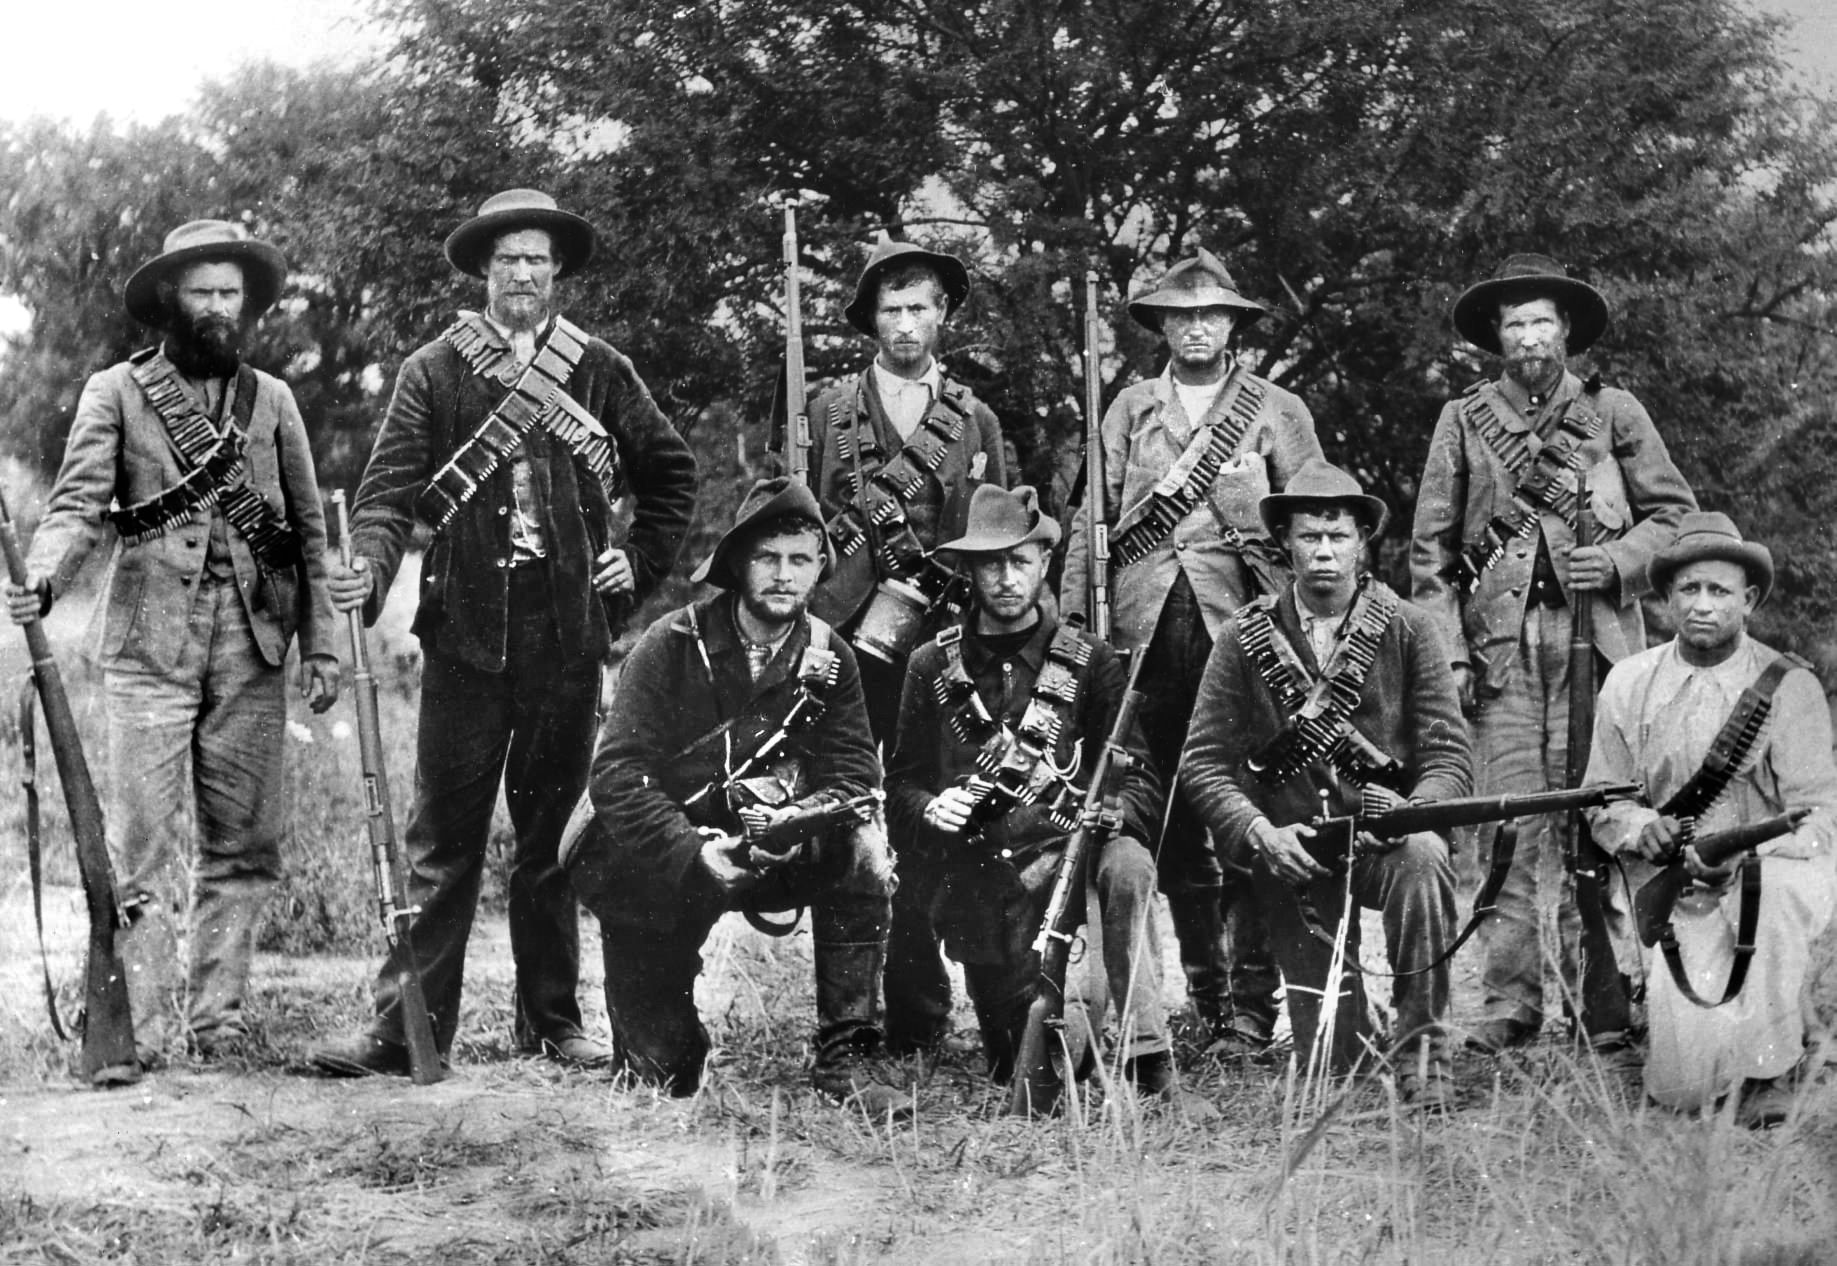 Transvaal President Paul Kruger purchased new Mauser rifles from Germany for his citizen-soldiers.